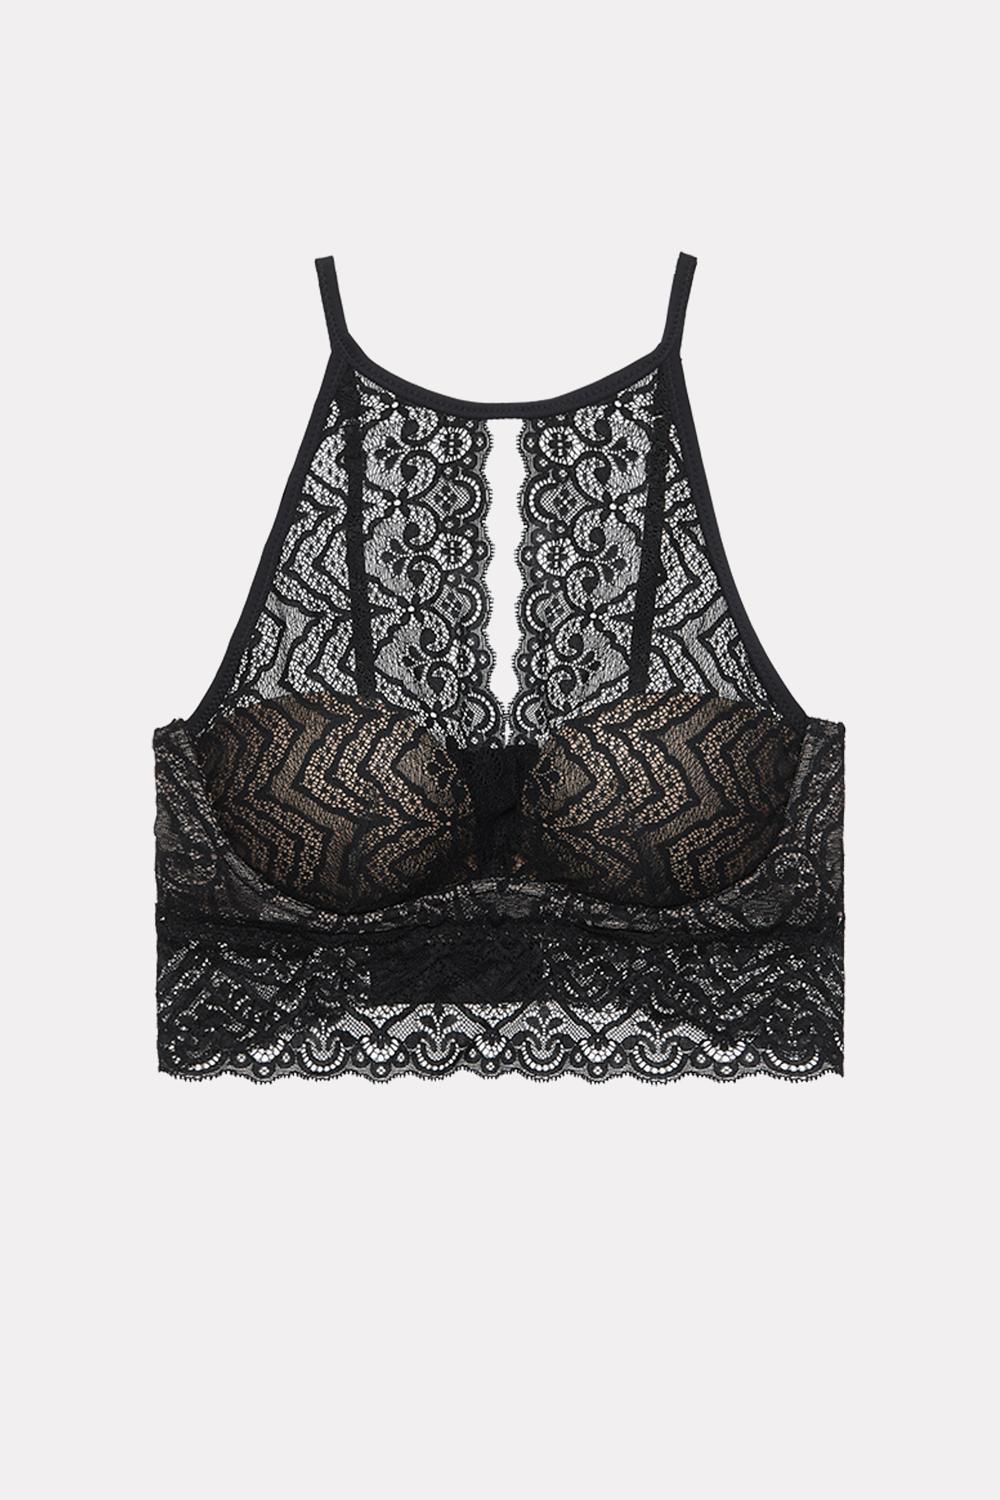 Bralette Intimissimi Cheap Sale, 50% OFF | a4accounting.com.au